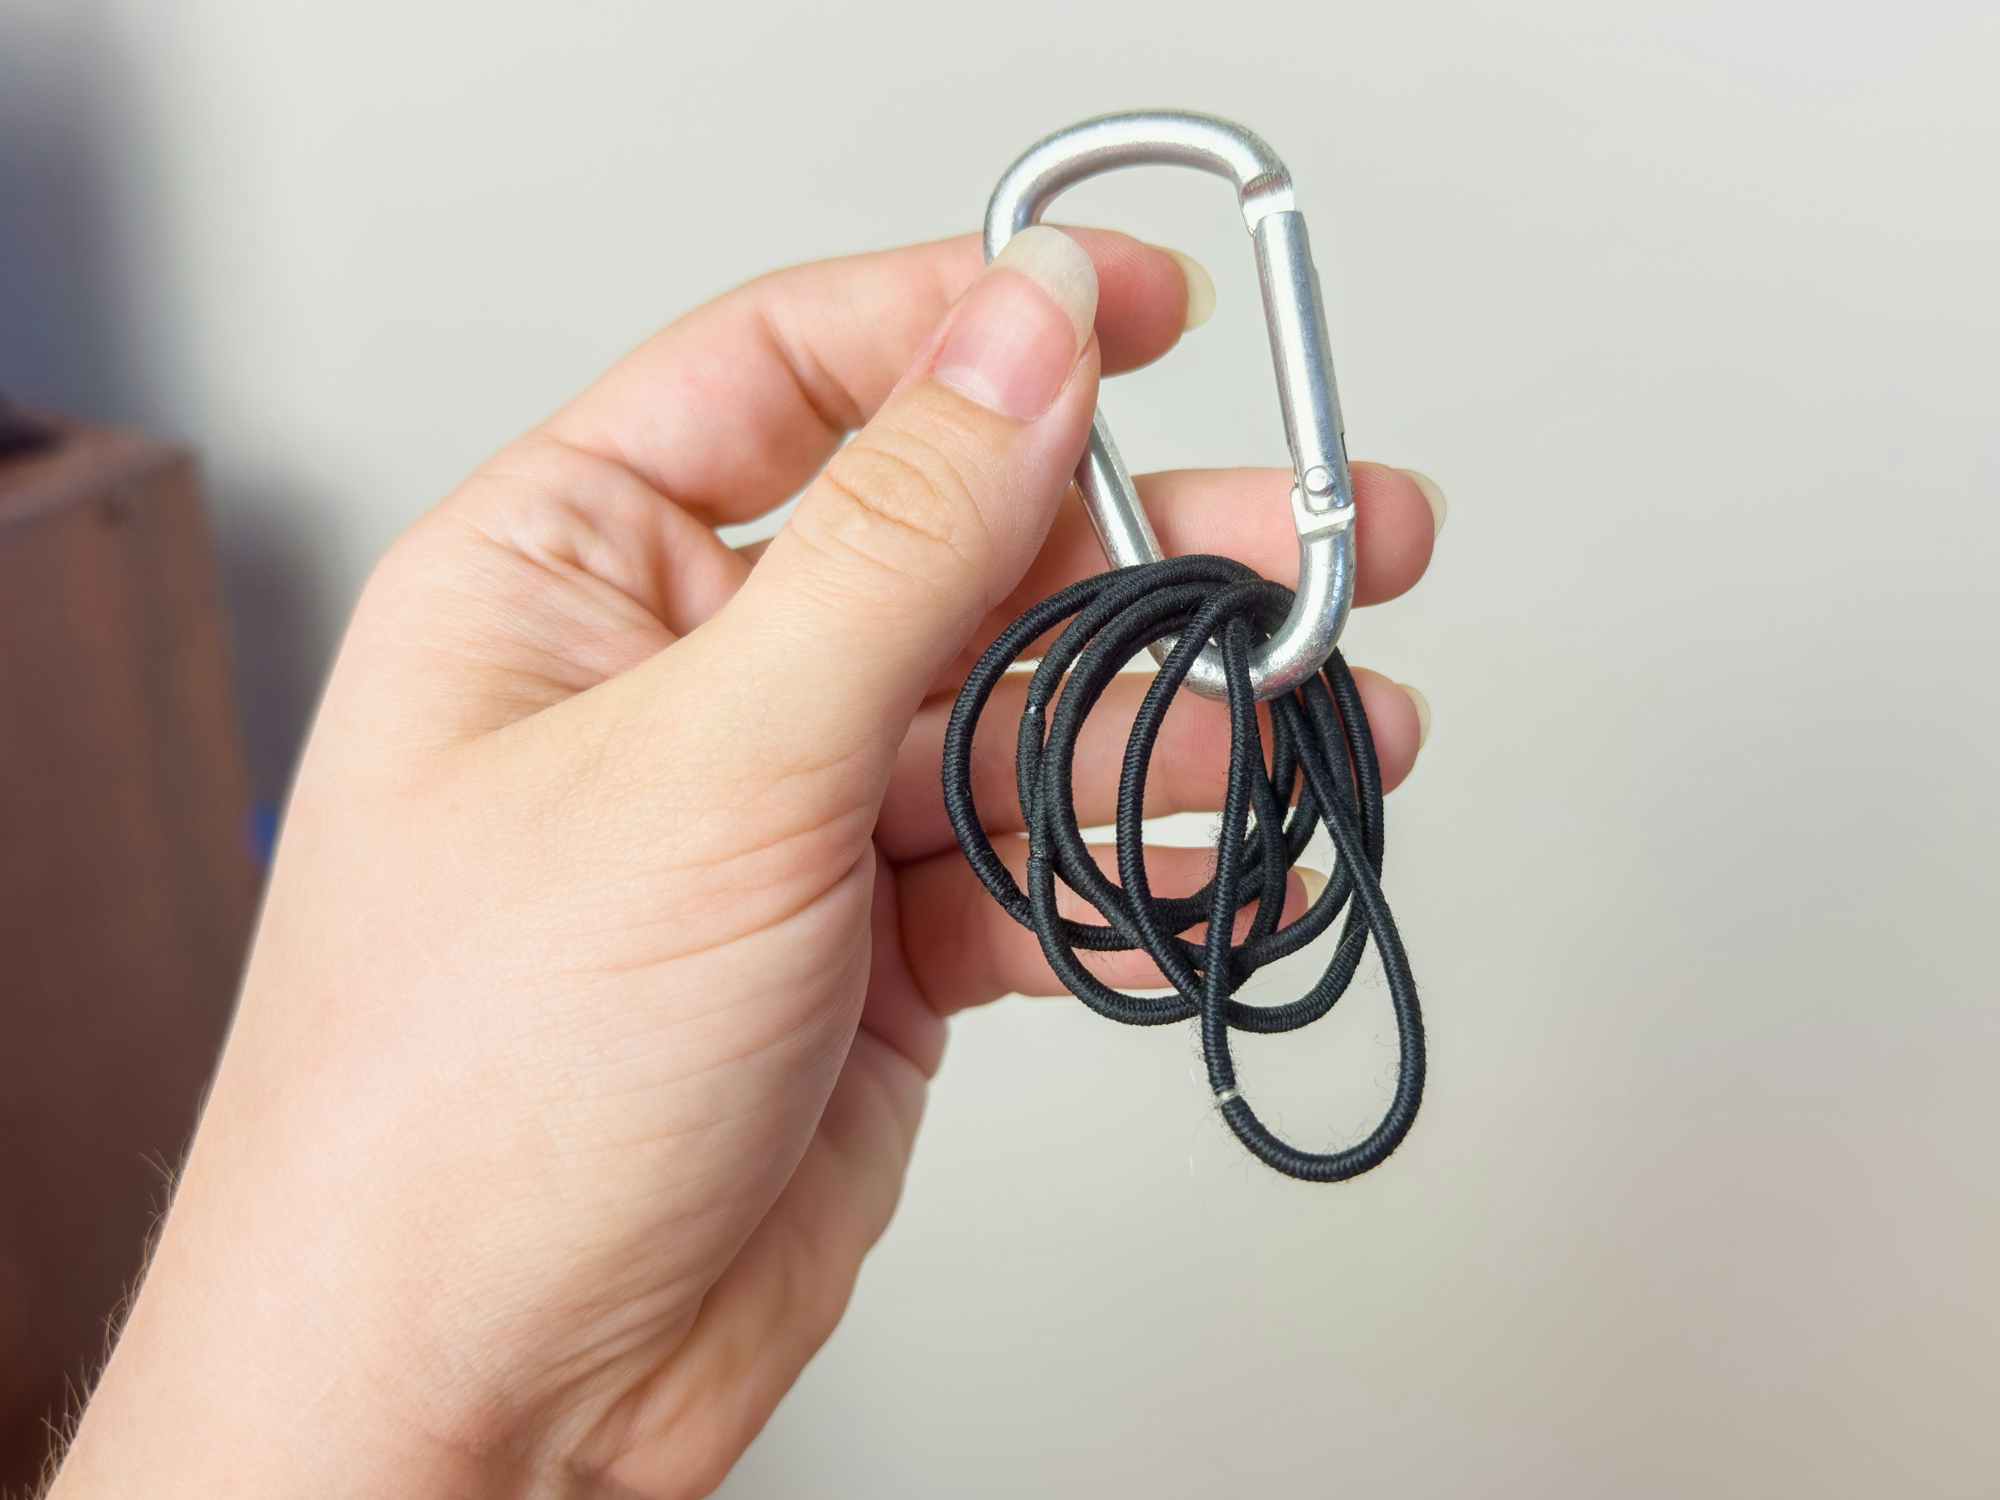 Someone holding up a carabiner with several hair ties clipped onto it